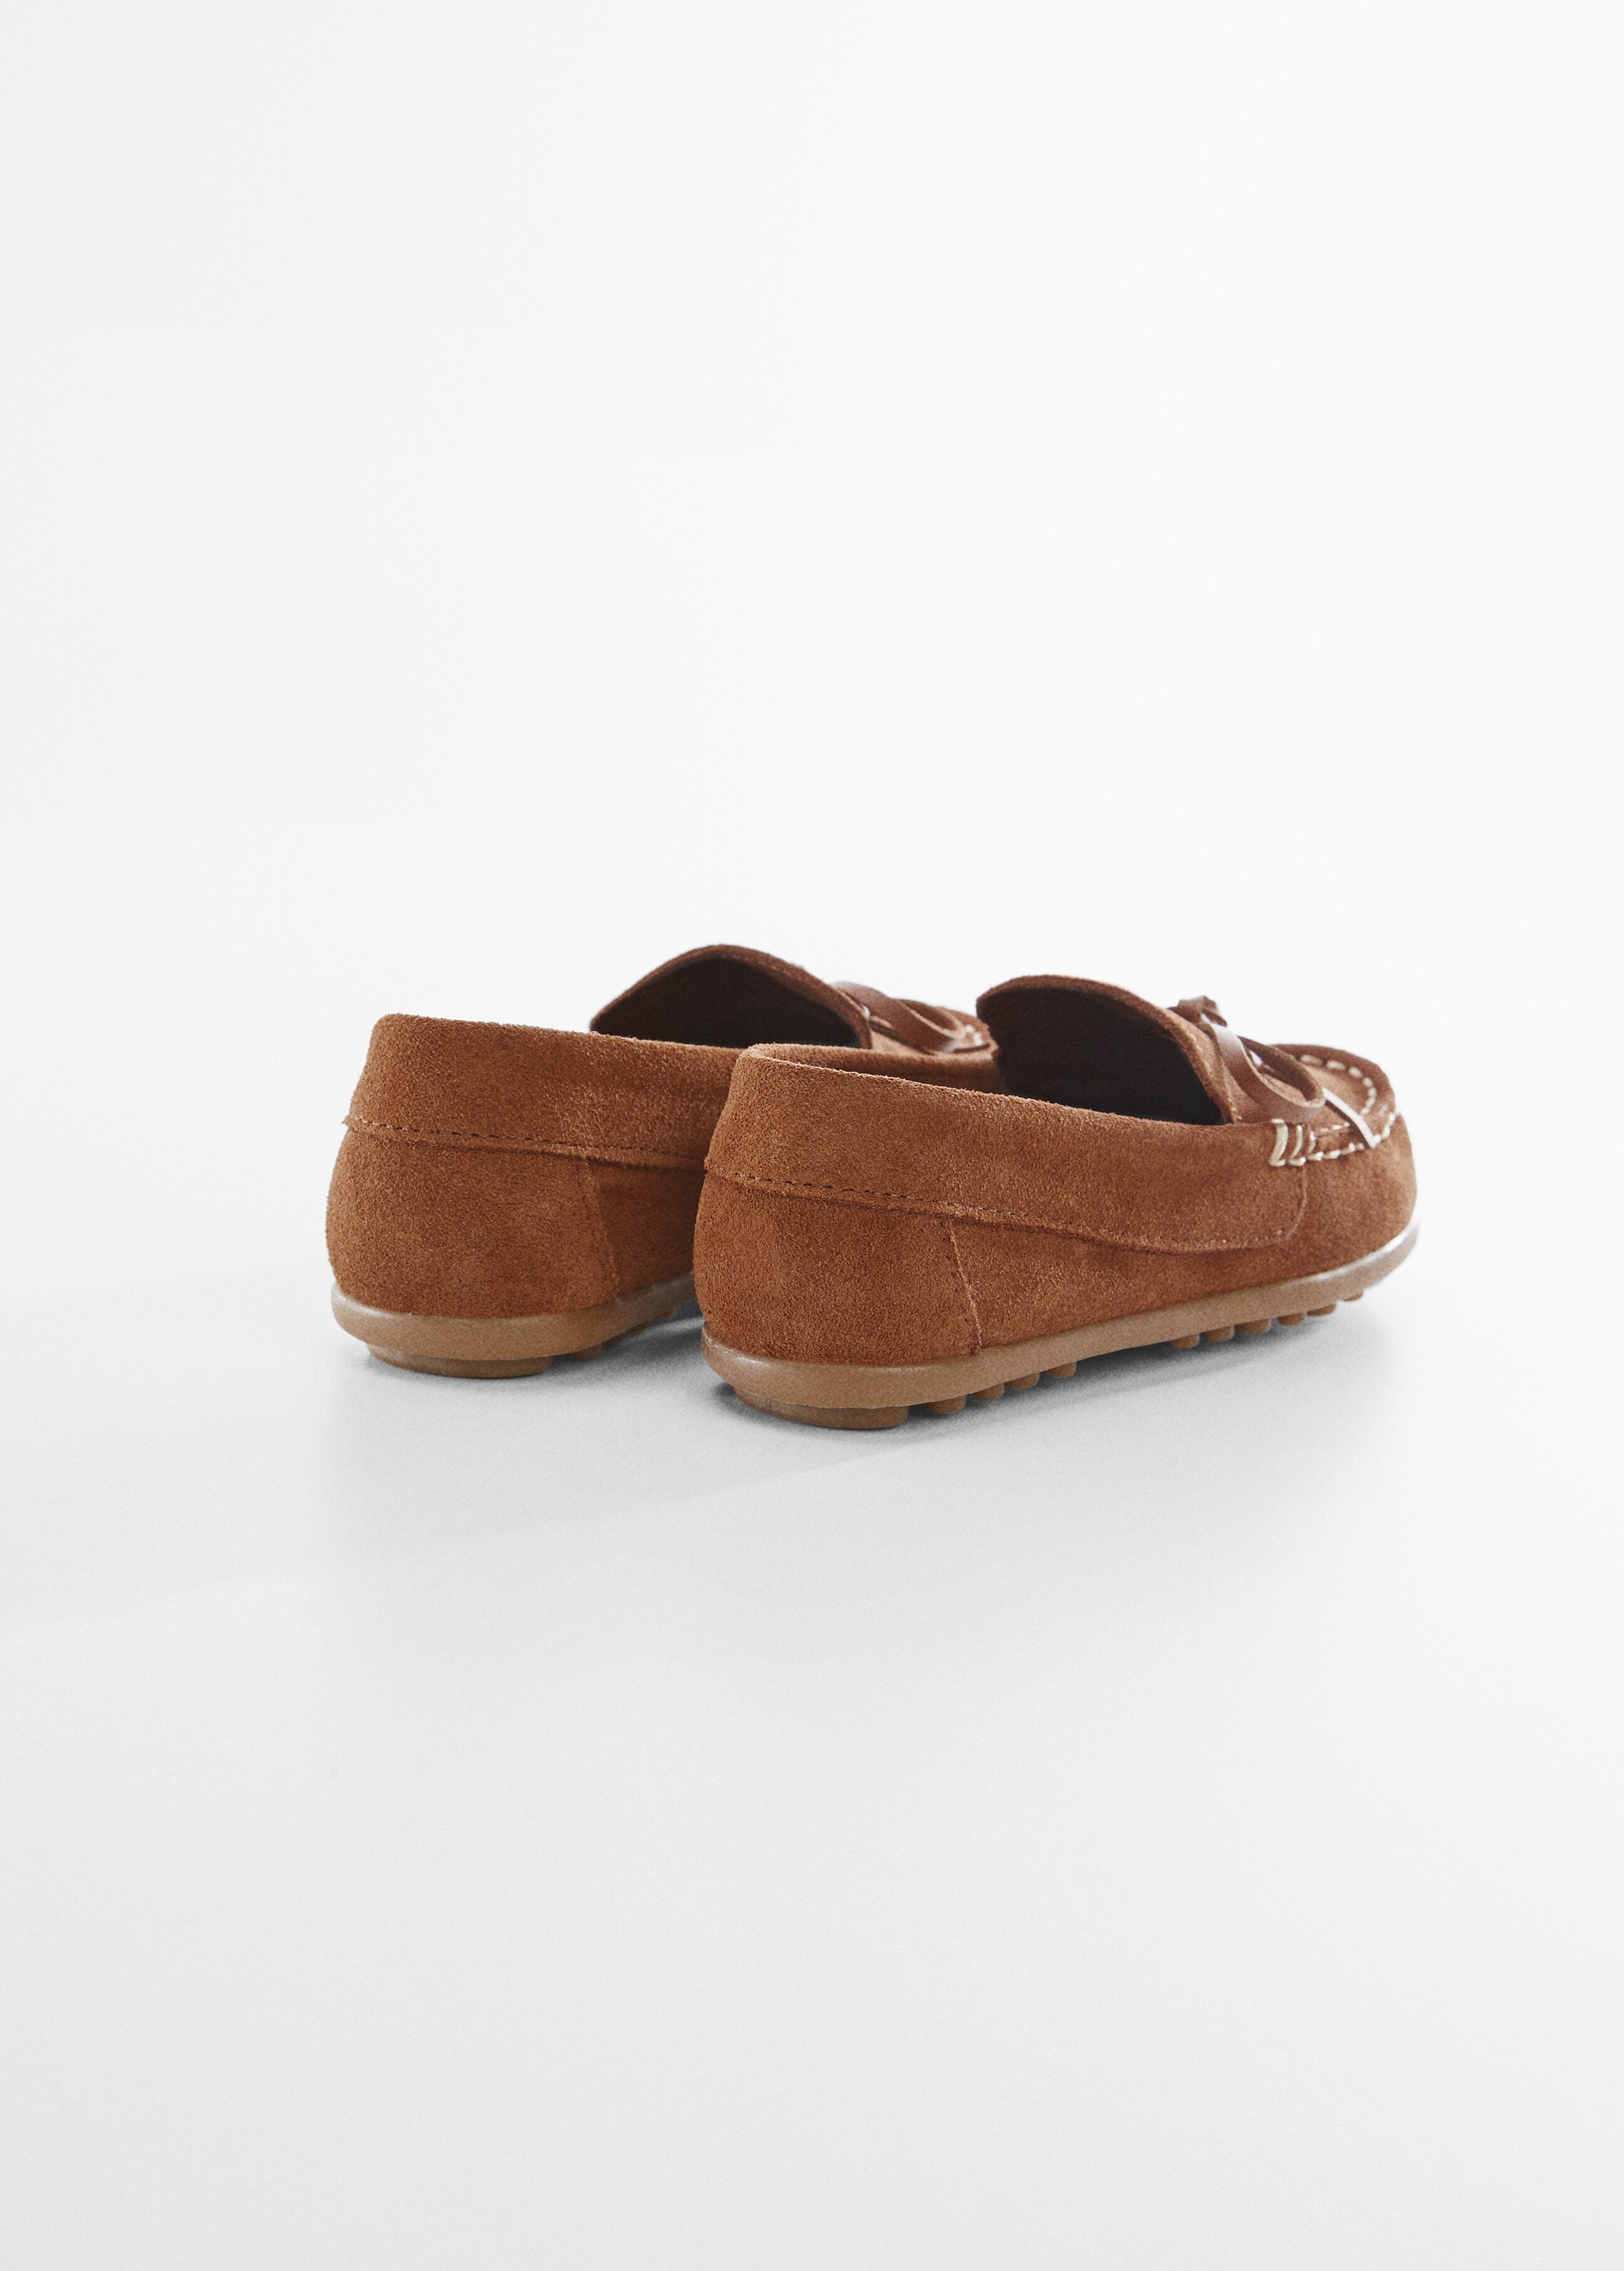 Suede moccasins - Details of the article 1